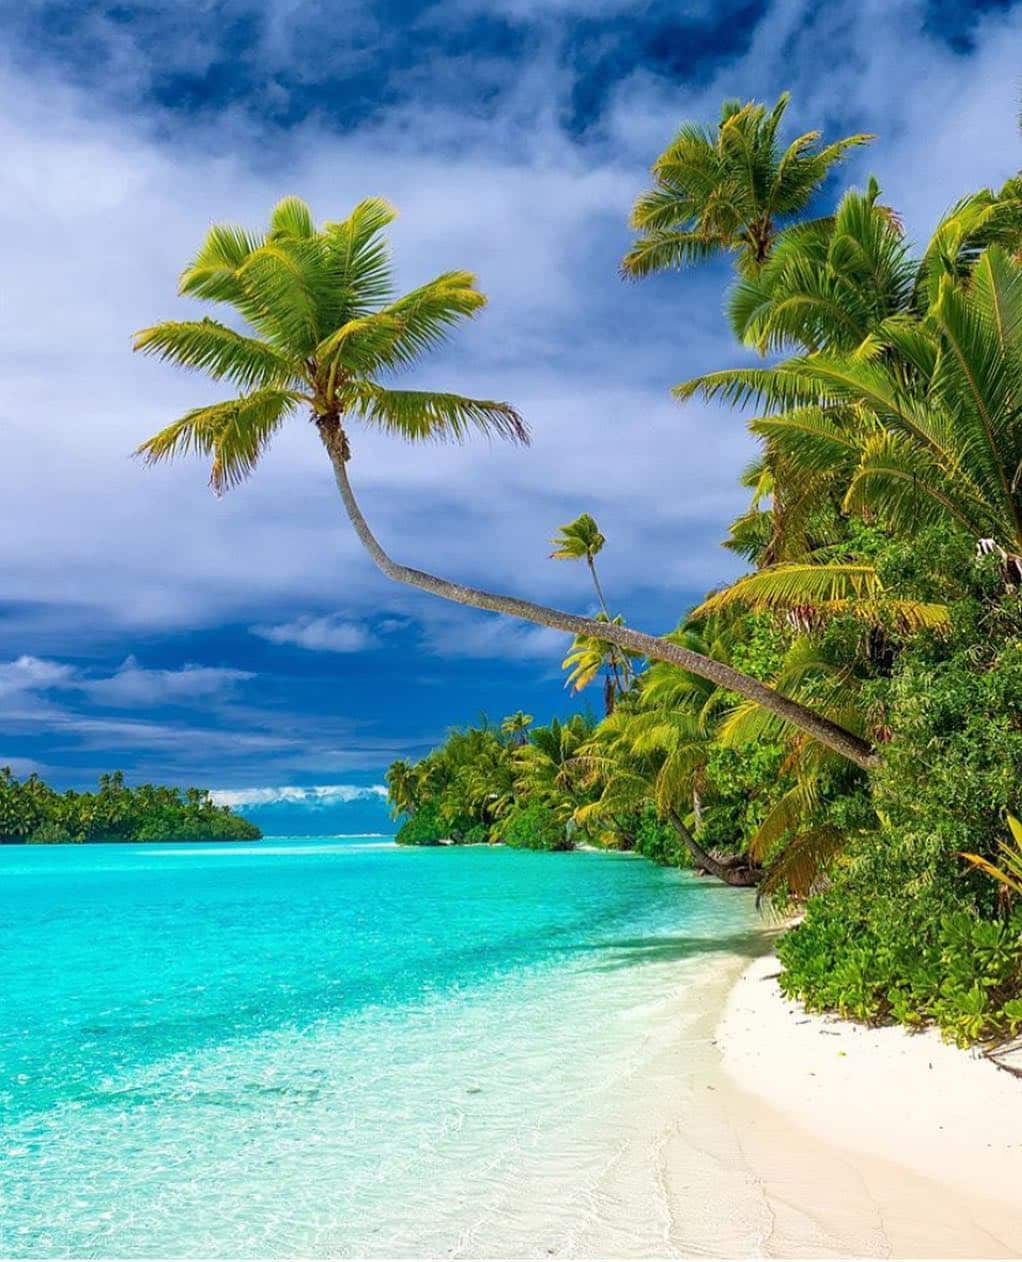 Here Is A List of World’s Top Tropical Beaches | Found The World